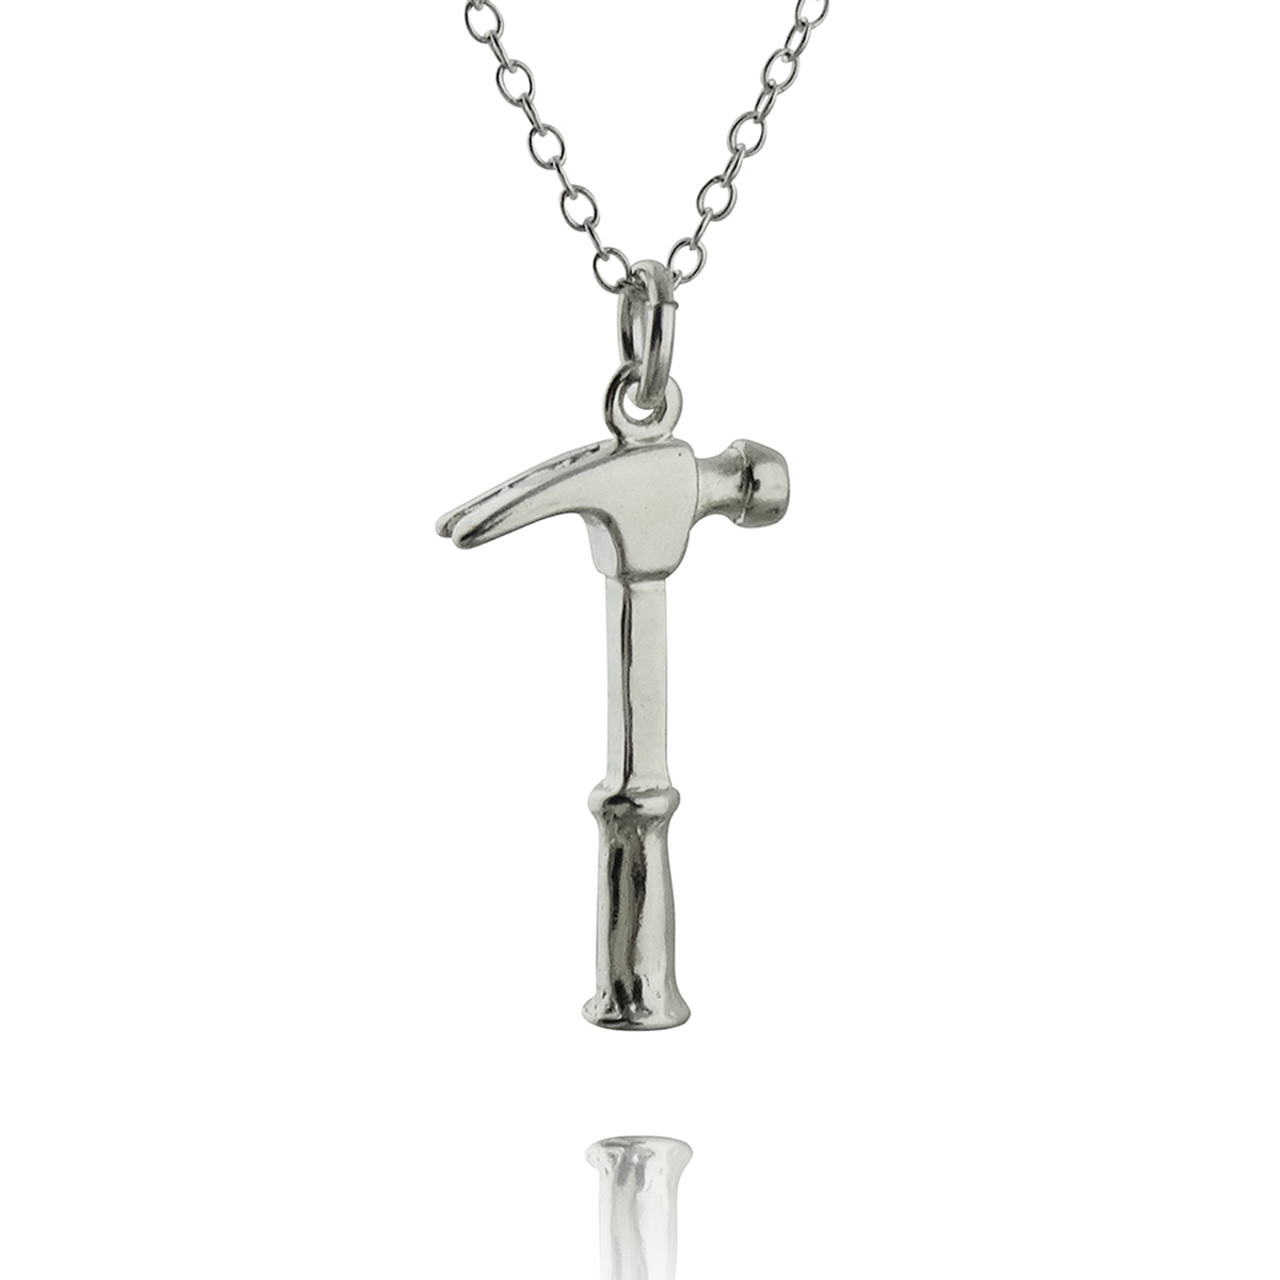 3D Hammer Charm Necklace - Sterling Silver - FashionJunkie4Life